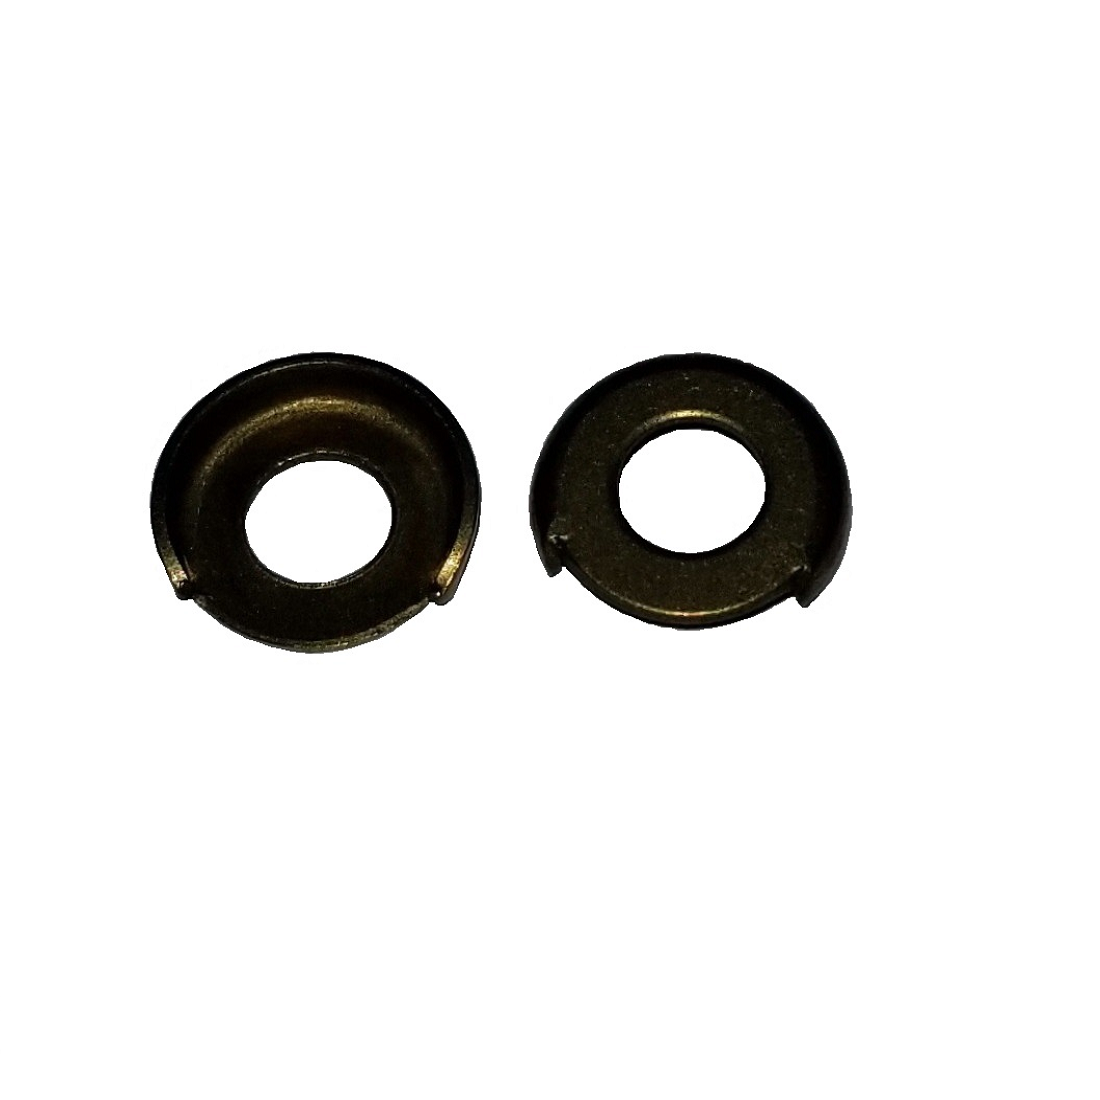 Terminal Cup Washer - 0.203 ID, 0.500 OD, 0.026 Thick, Brass